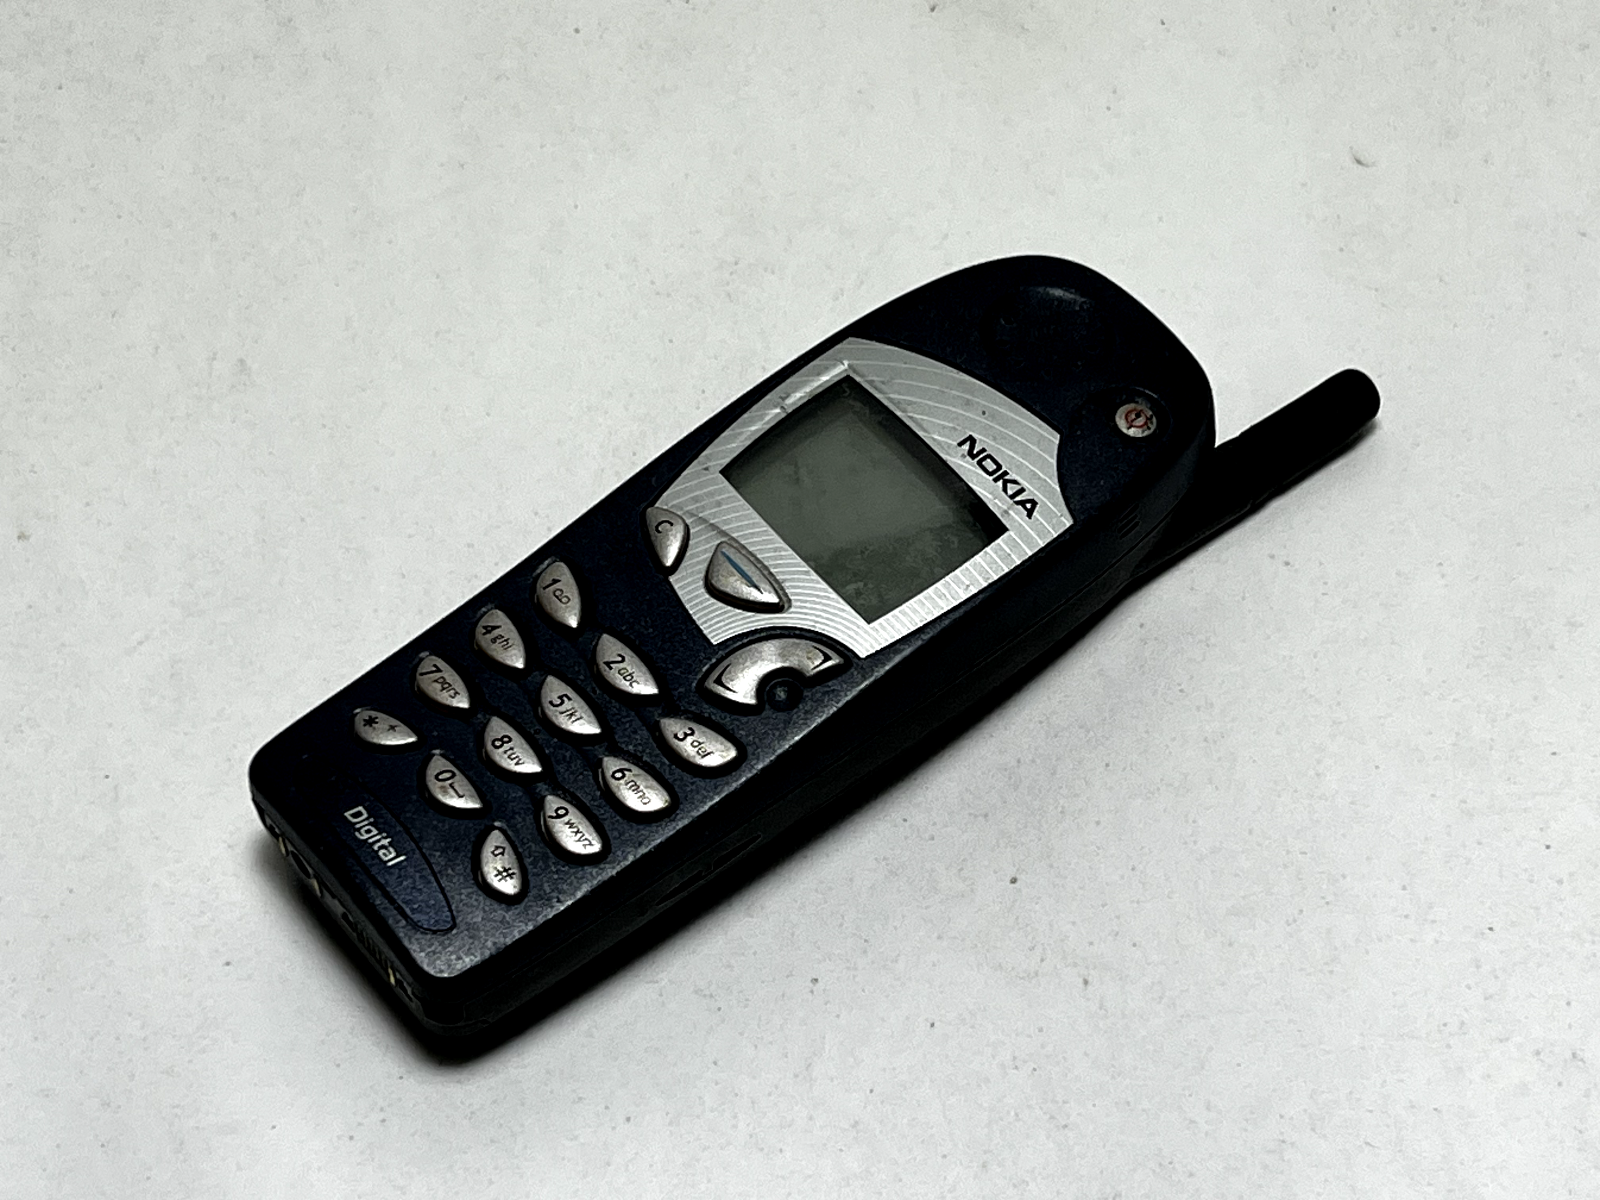 Nokia 5165 - Blue Cellular Phone - FOR PARTS ONLY - $9.89